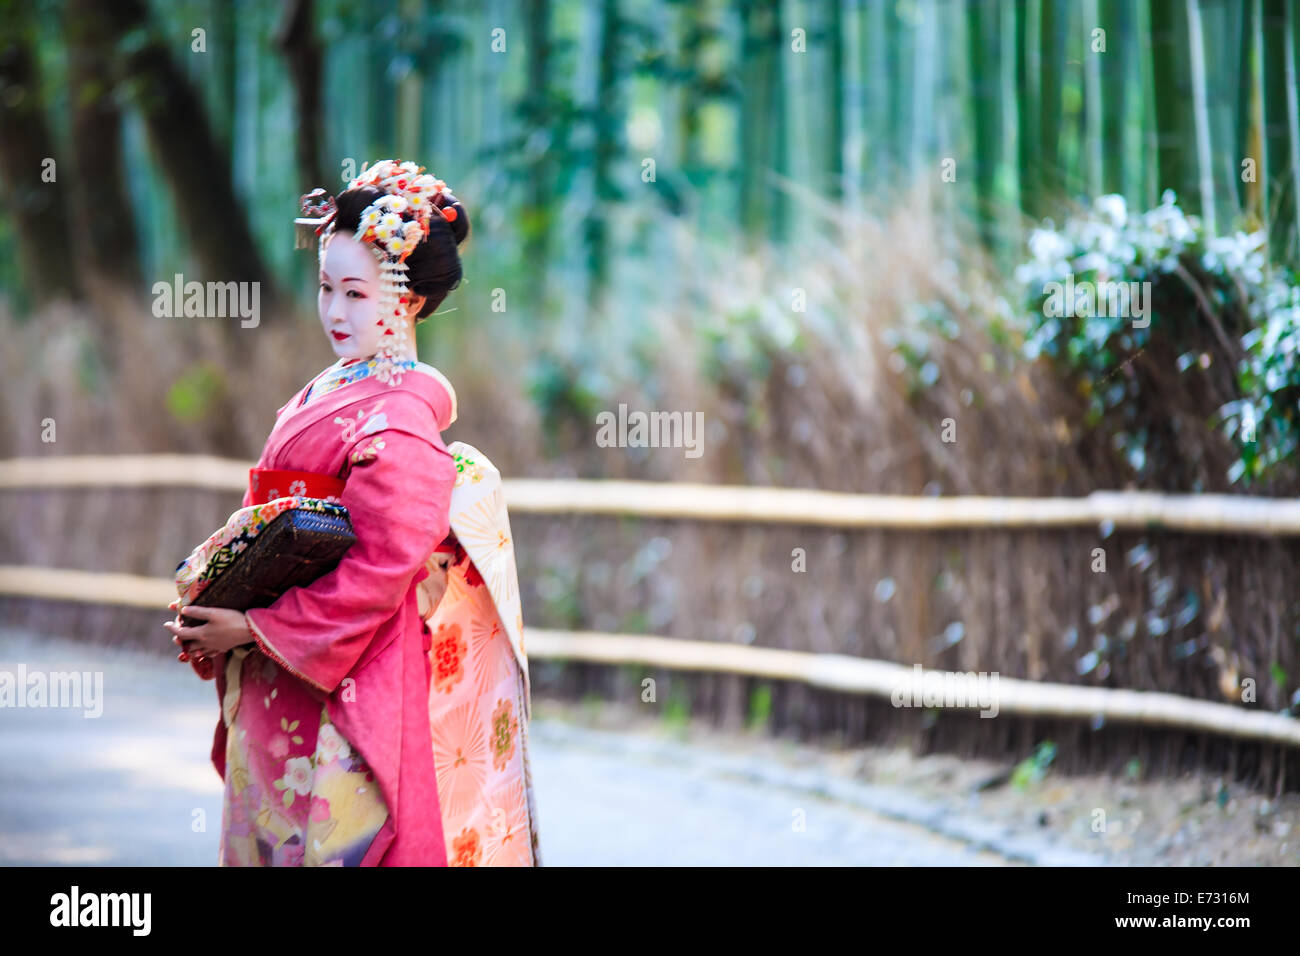 Kyoto, Japan - April 14, 2013: The bamboo forest of Kyoto, Japan Stock Photo